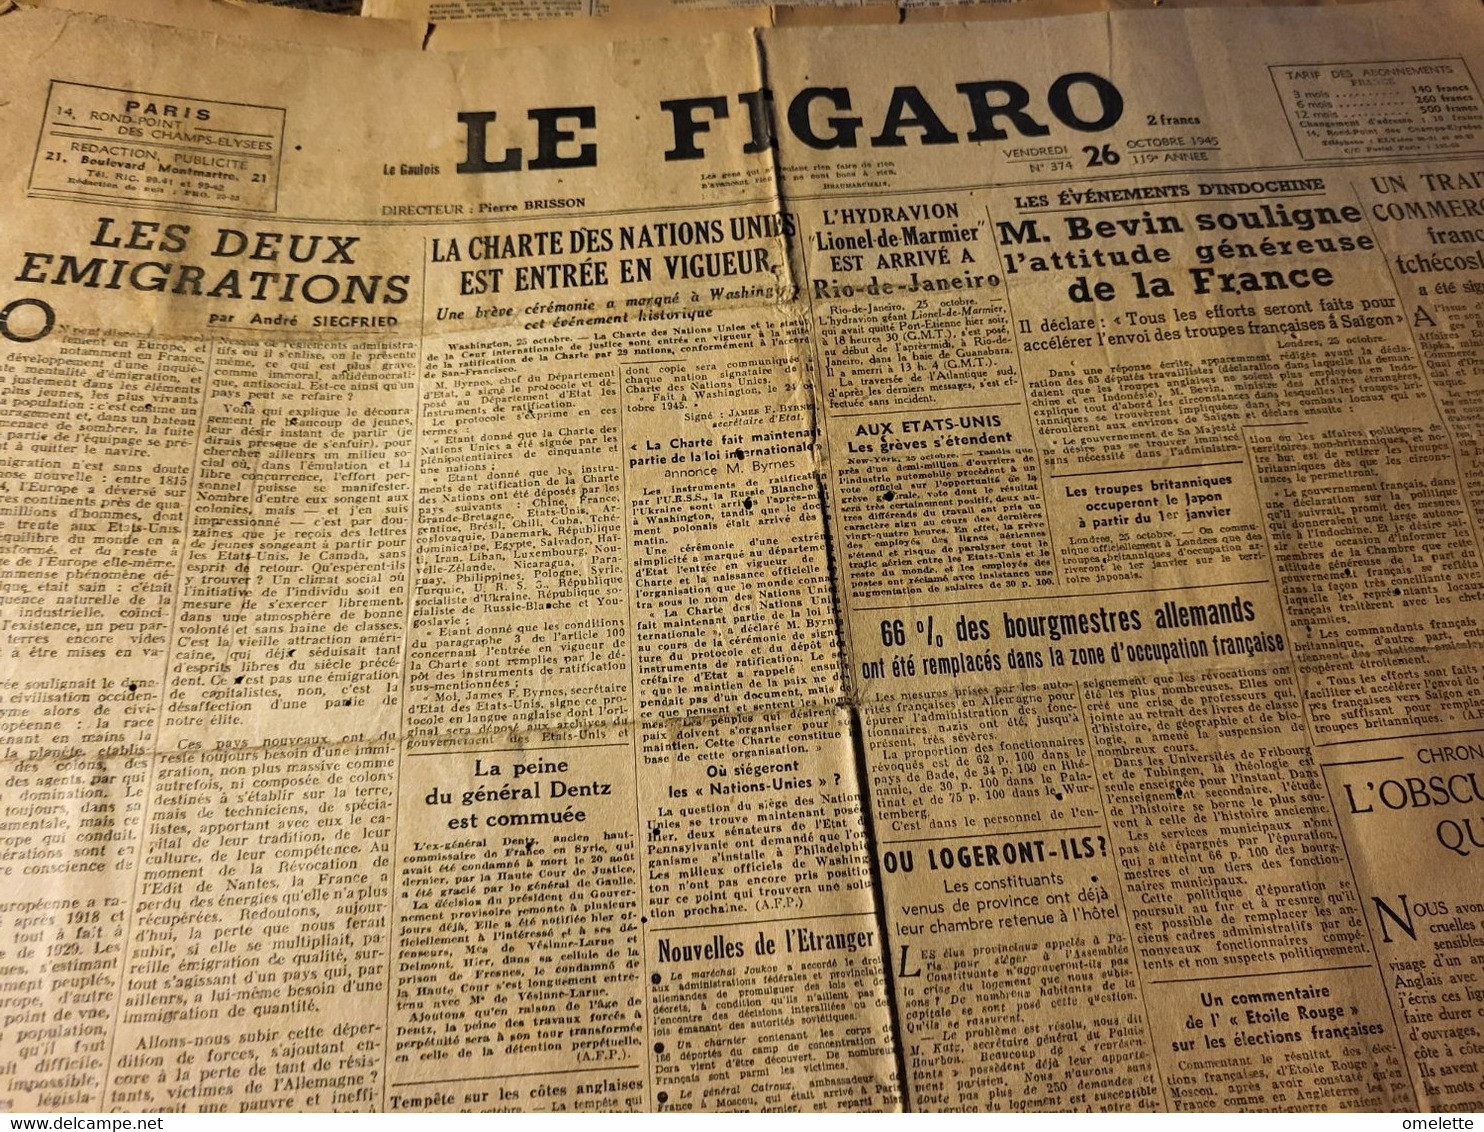 FIGARO 45 /EMIGRATIONS SIEFRIED/INDOCHINE/GZORGZQ DUHAMEL BATAILLE QUOTIDIENNE - General Issues